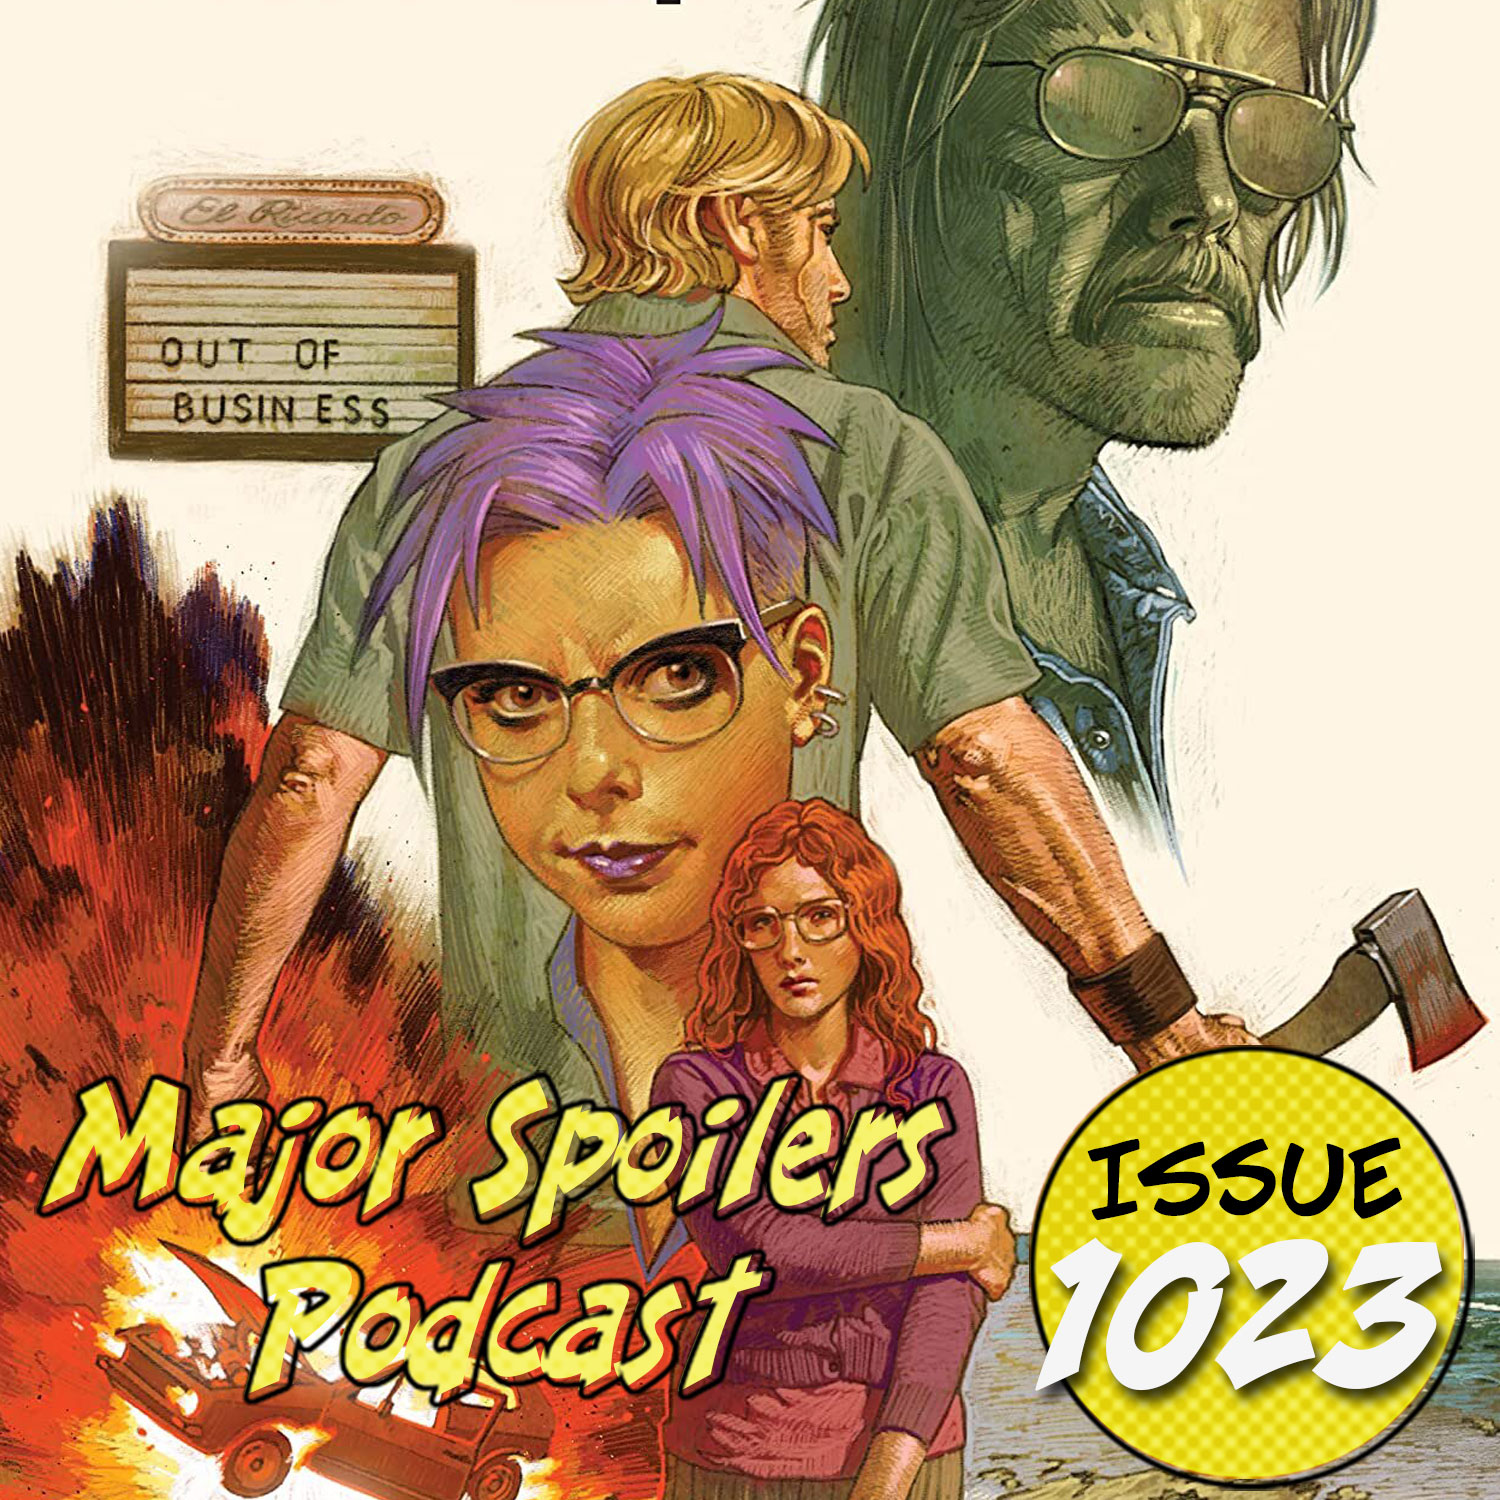 Major Spoilers Podcast #1023: The Reckless Podcast